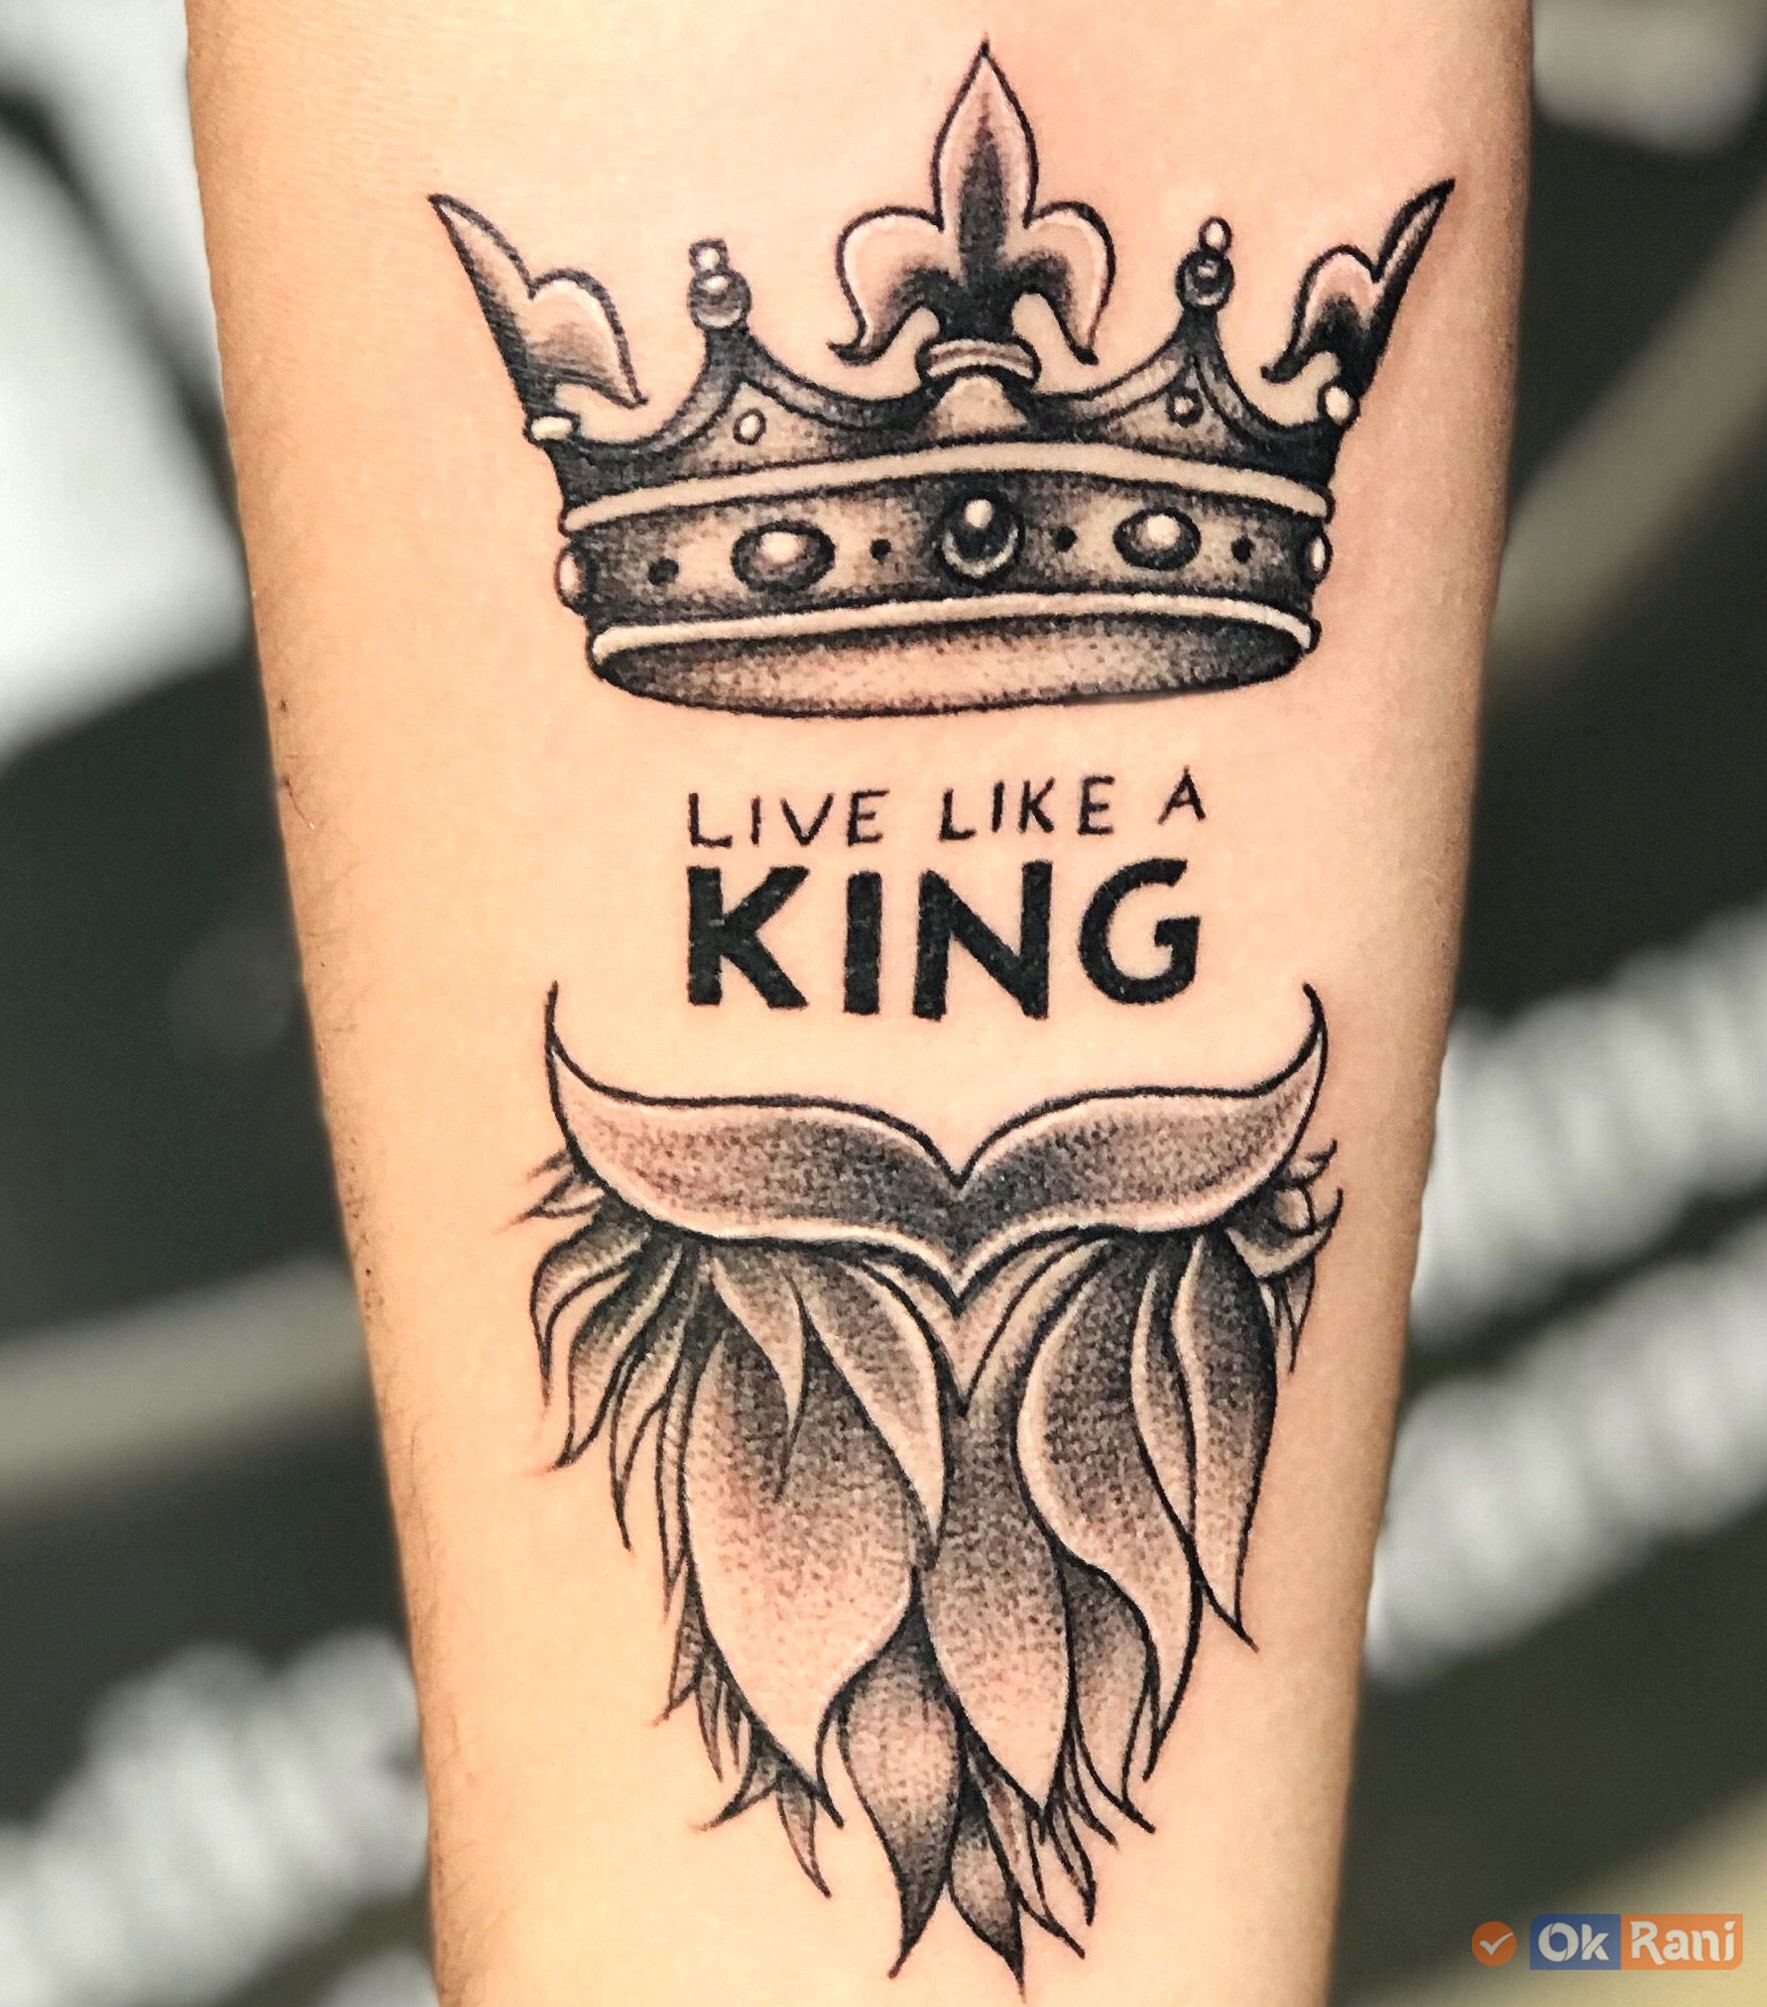 Ansh Ink Tattoos - Crown 👑 Tattoo| Wrist Tattoo Design . . For appointment  Dm me . . #crowntattoos #crowntattoo #kingcrowntattoo #kingtattoo  #kingtattoos #kingcrown #King #king #smalltattoo #tinytattoo #wristtattoo  #wristtattoos #wristtattooidea #art #